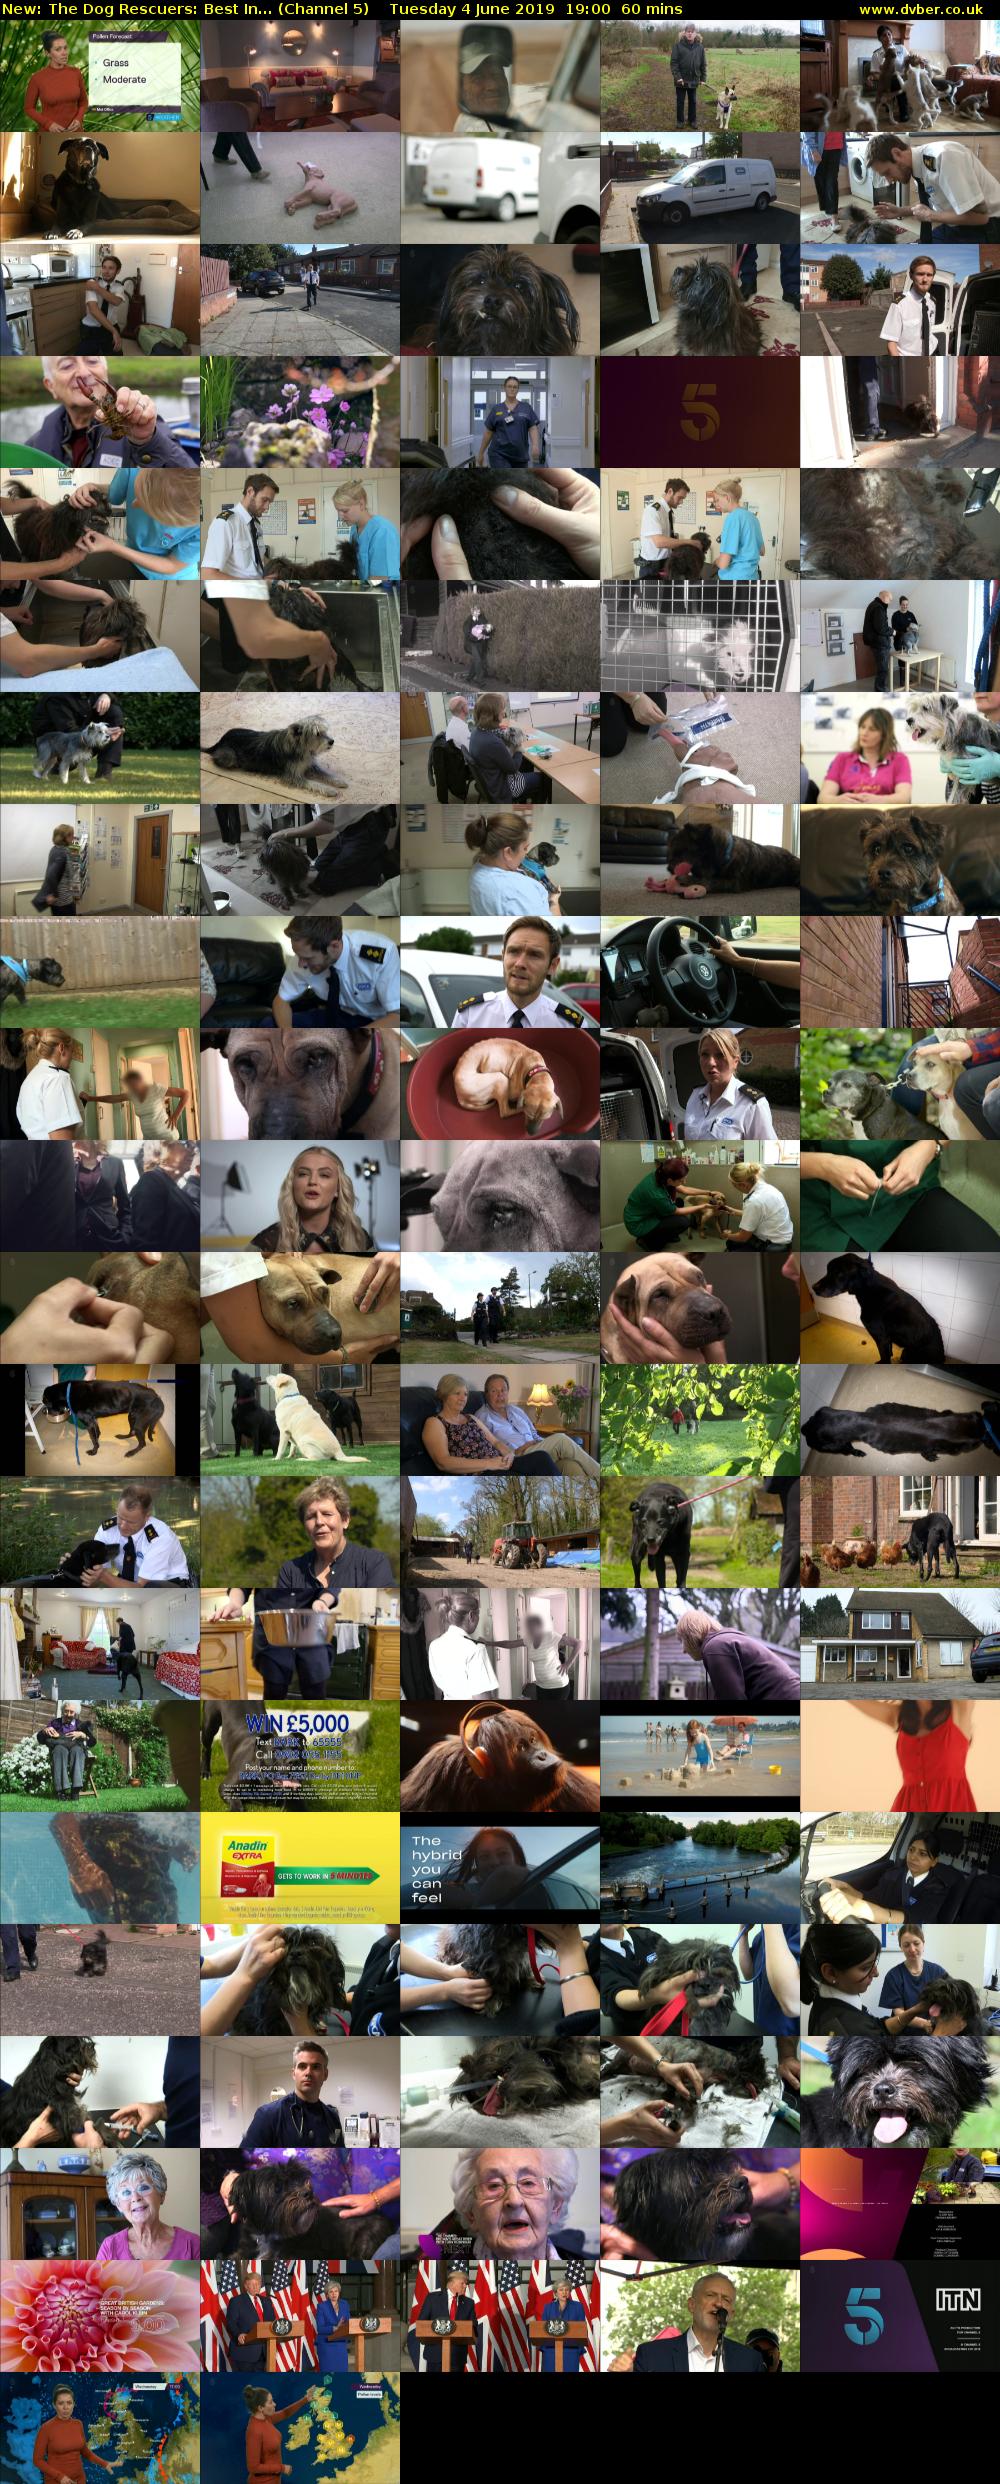 The Dog Rescuers: Best In... (Channel 5) Tuesday 4 June 2019 19:00 - 20:00